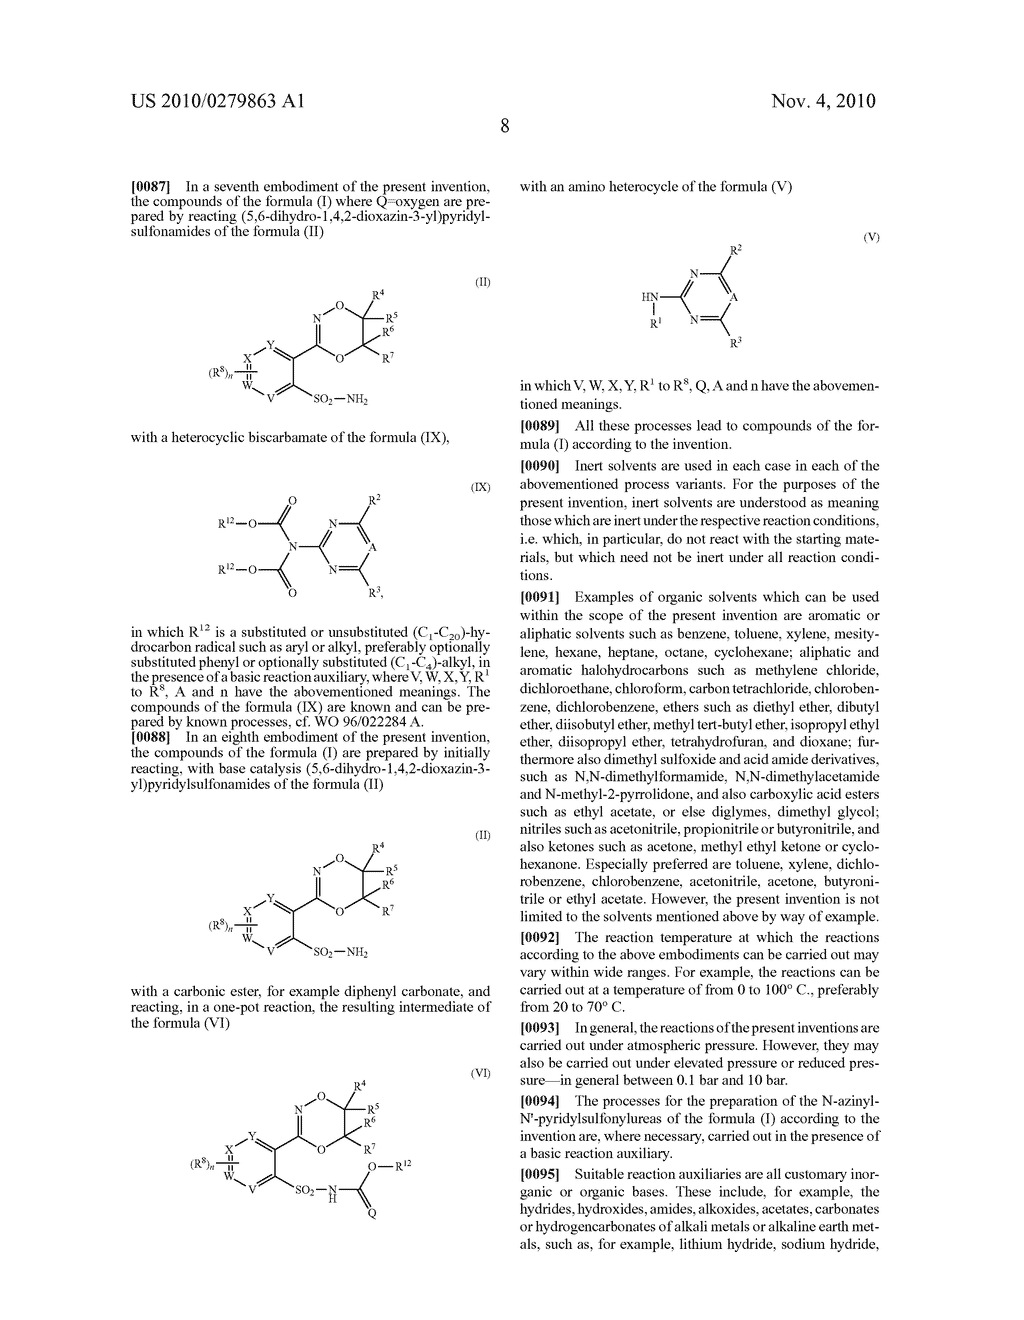 HERBICIDAL COMPOUNDS BASED ON N-AZINYL-N'-PYRIDYLSULFONYLUREAS - diagram, schematic, and image 09